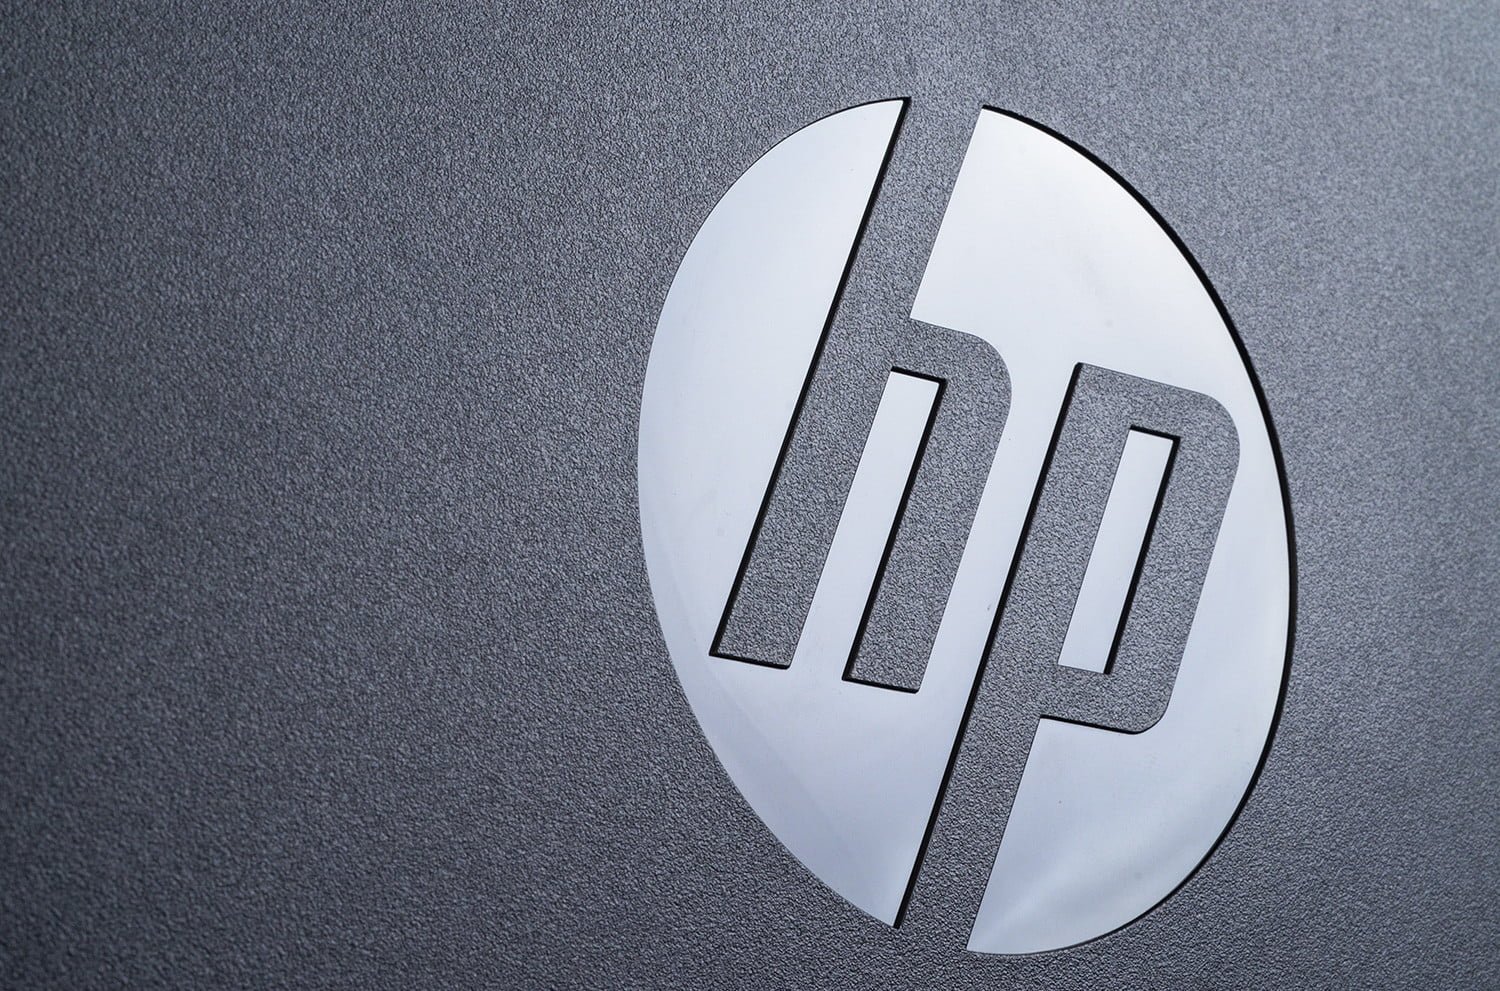 HP laptop Cyber Monday deals have landed — from $150